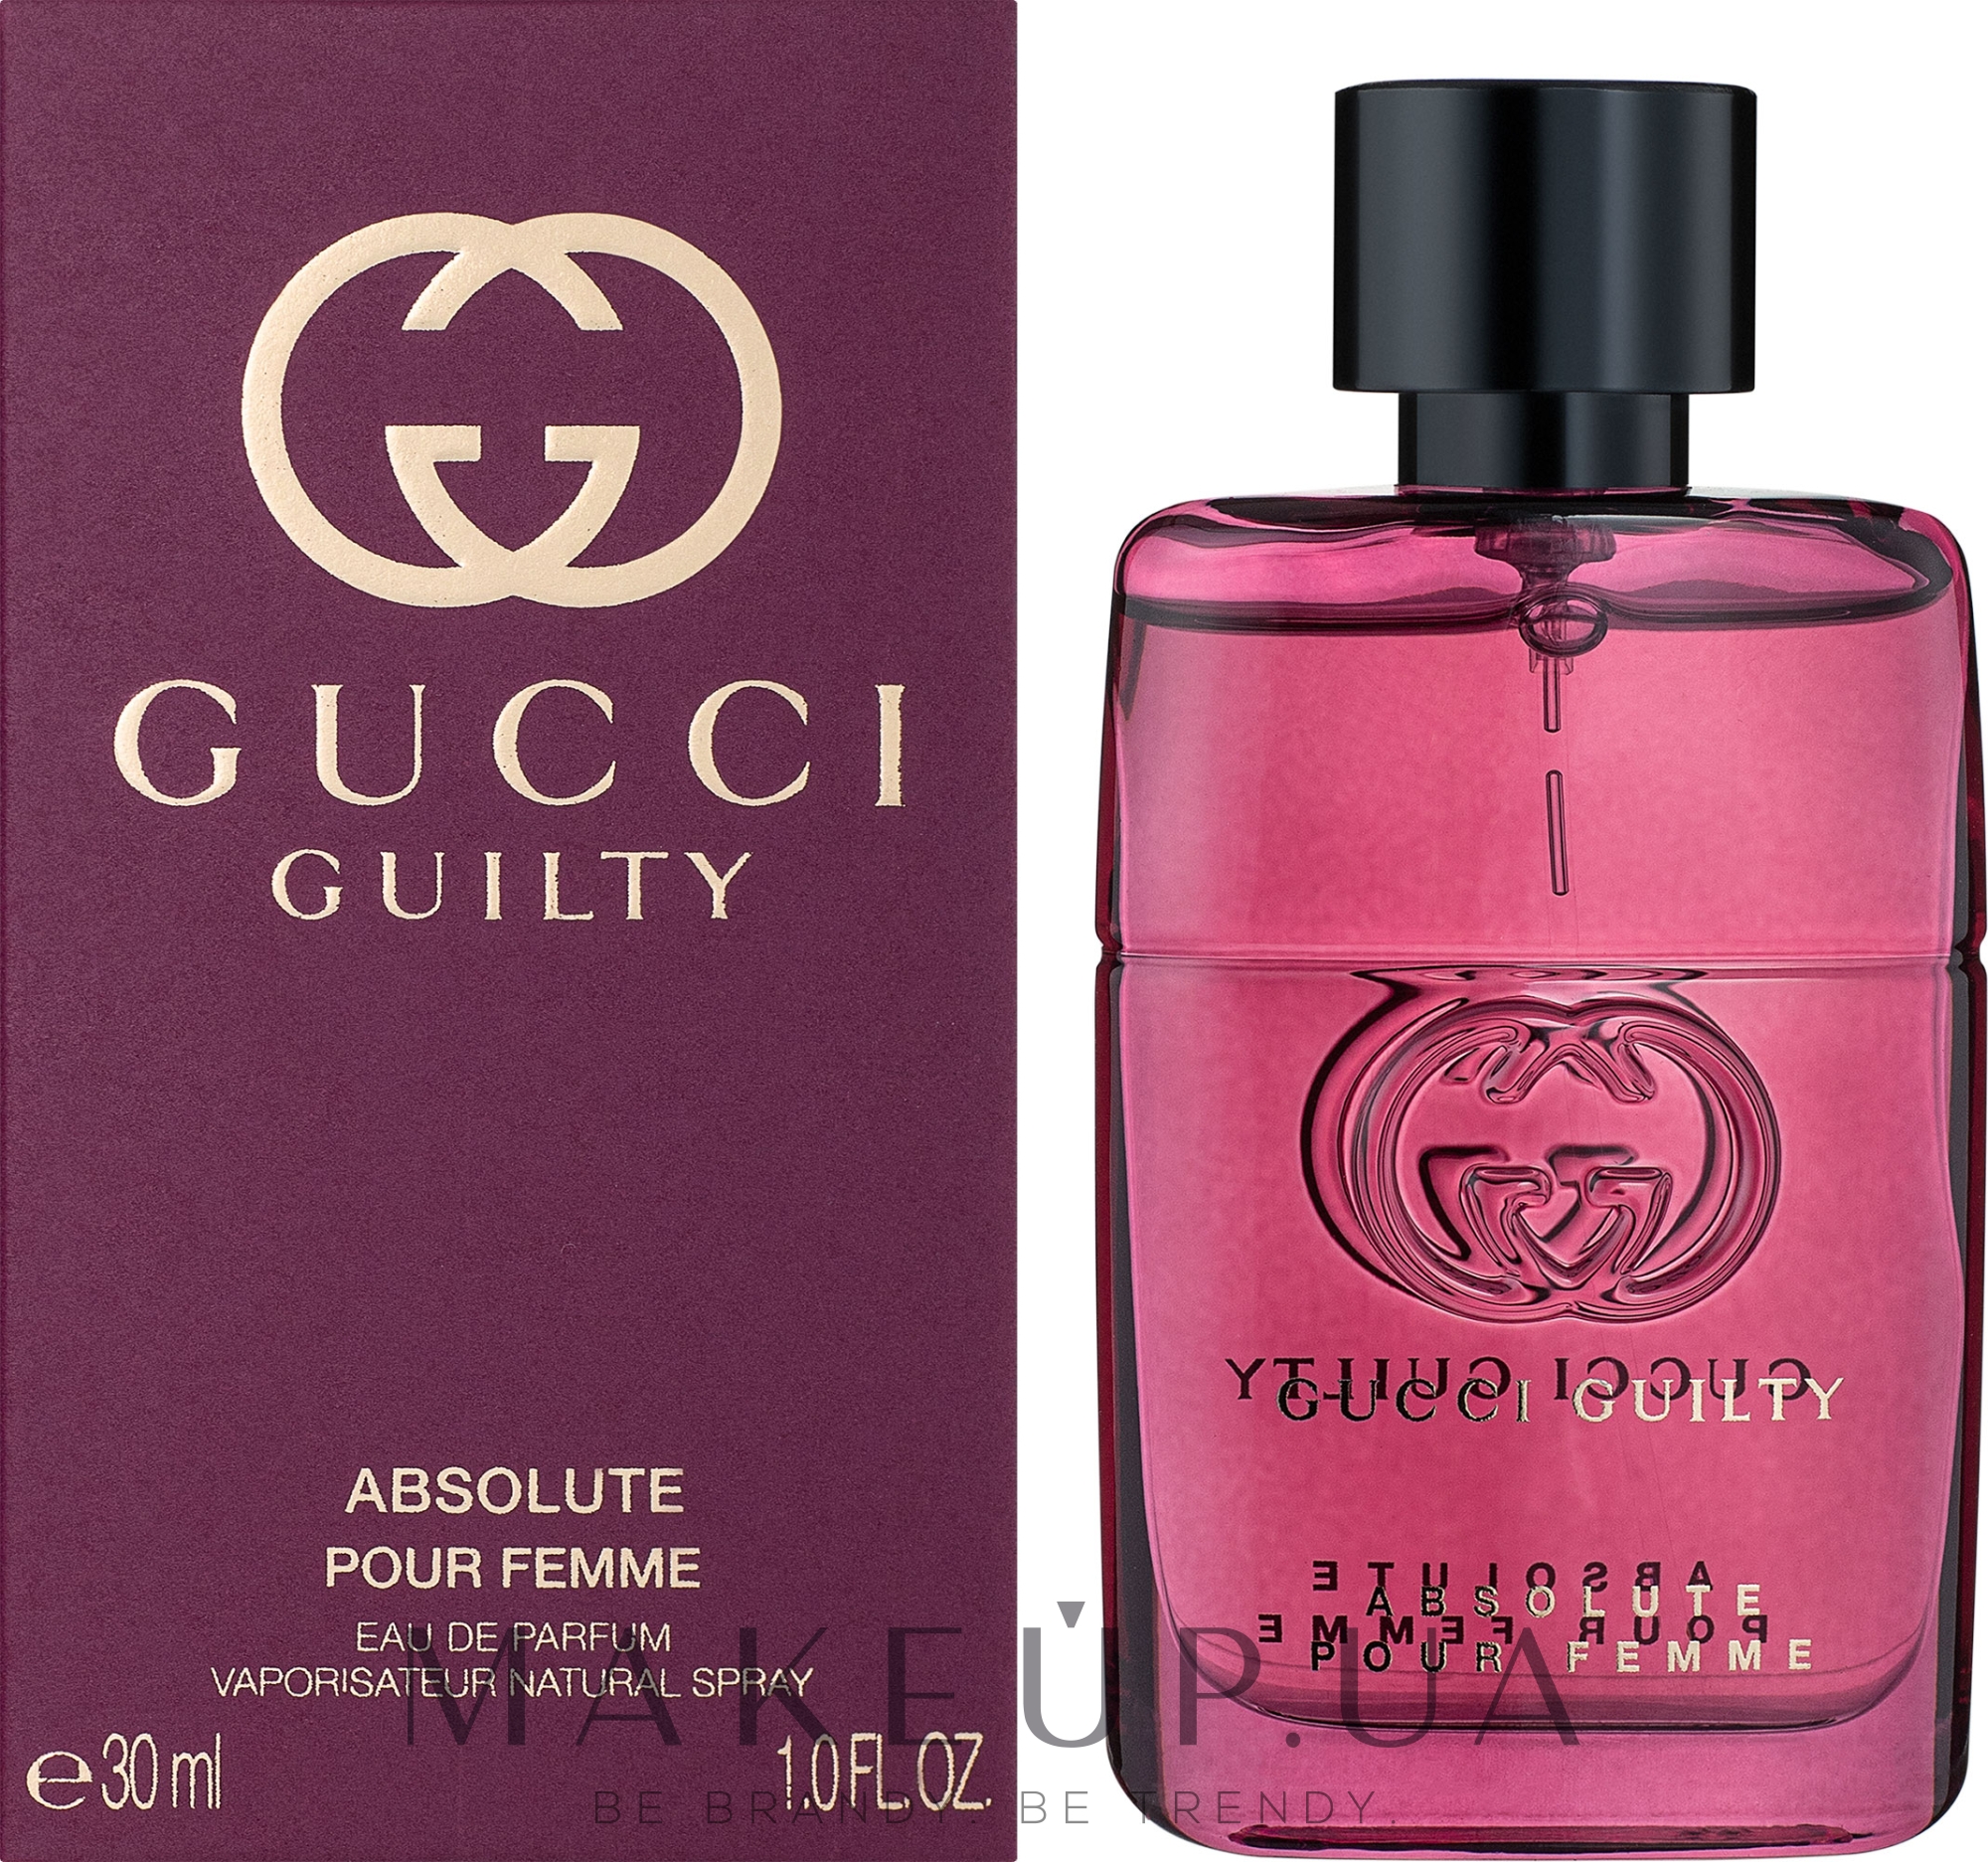 Gucci guilty absolute pour. Gucci guilty absolute pour homme 50ml. Gucci guilty absolute pour femme. Gucci guilty absolute pour femme,90 мл. Гуччи guilty absolute pour femme.